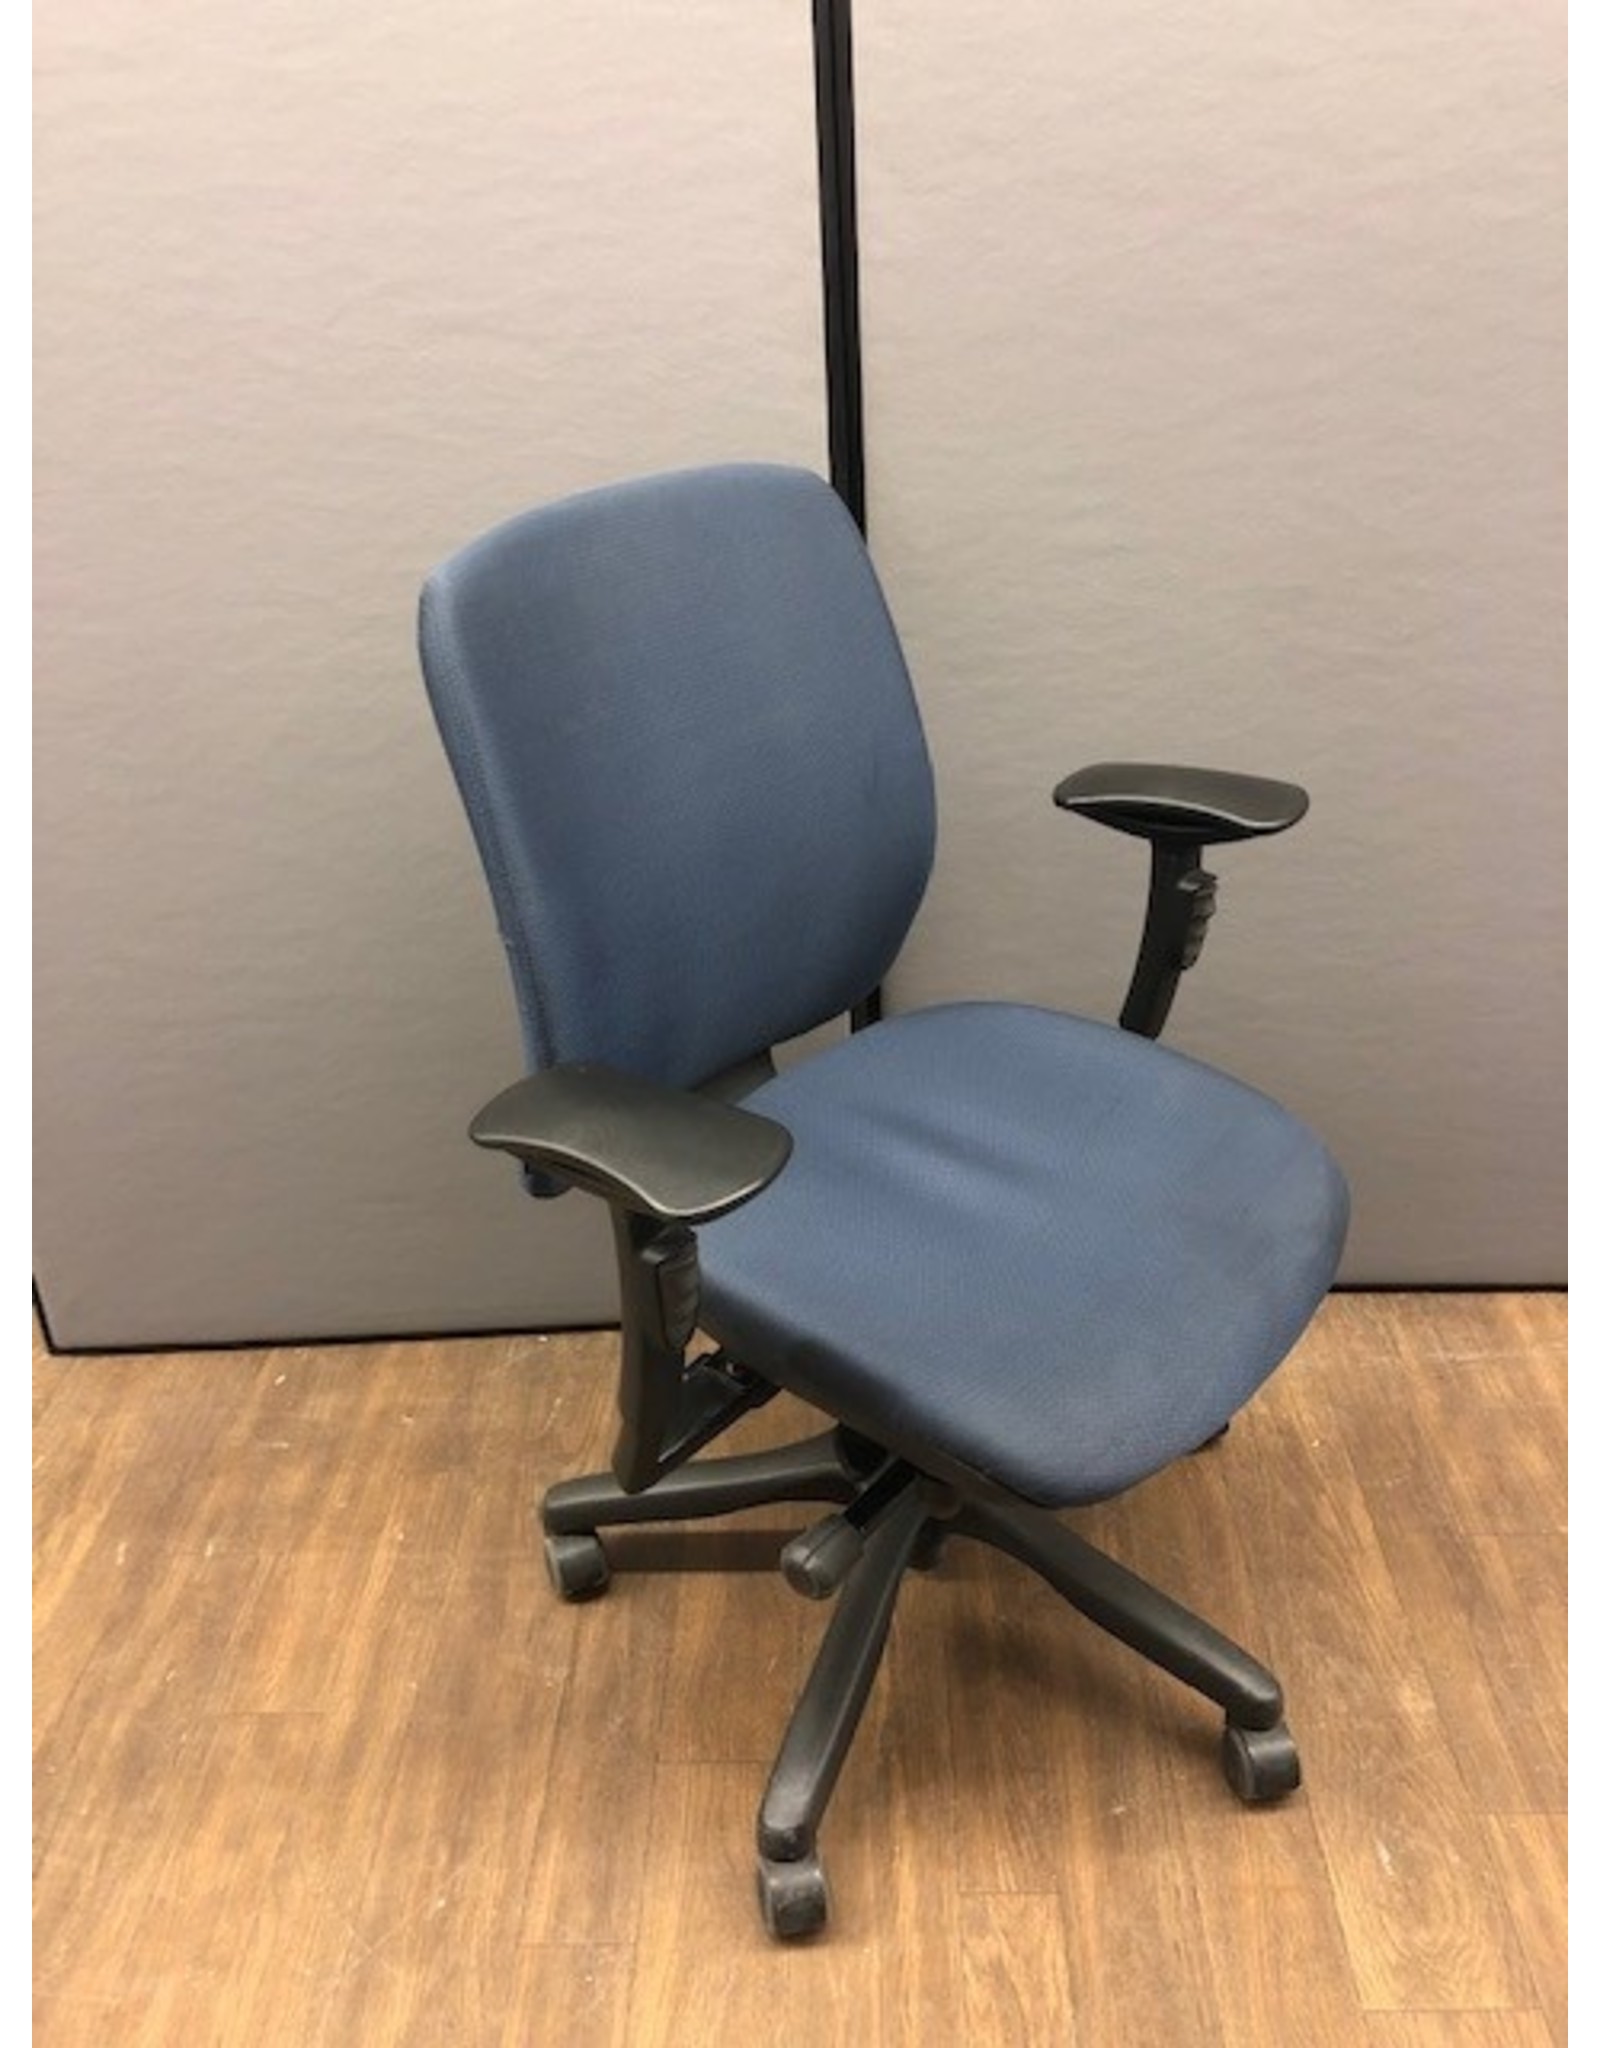 Used Teknion Amicus Task Chair with Extra Features